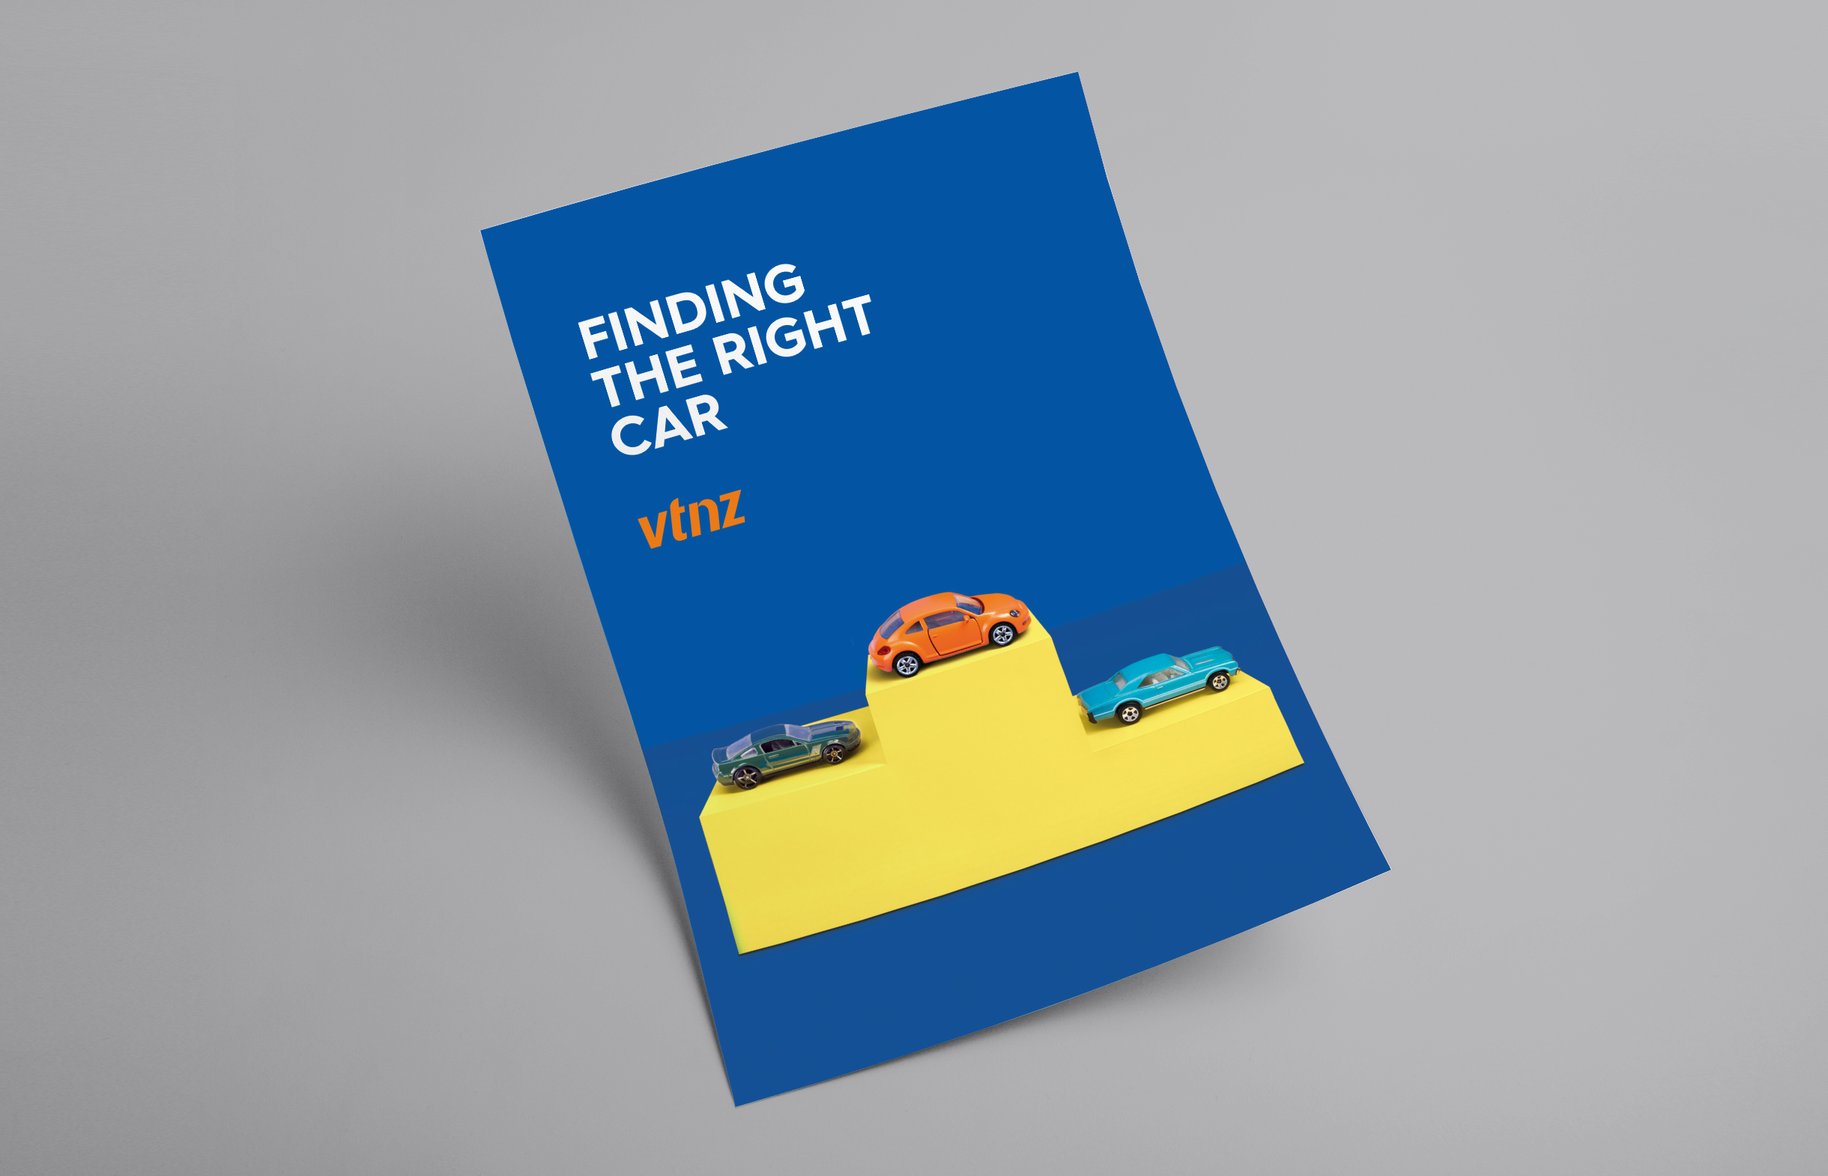 VTNZ 'Finding the right car' Poster